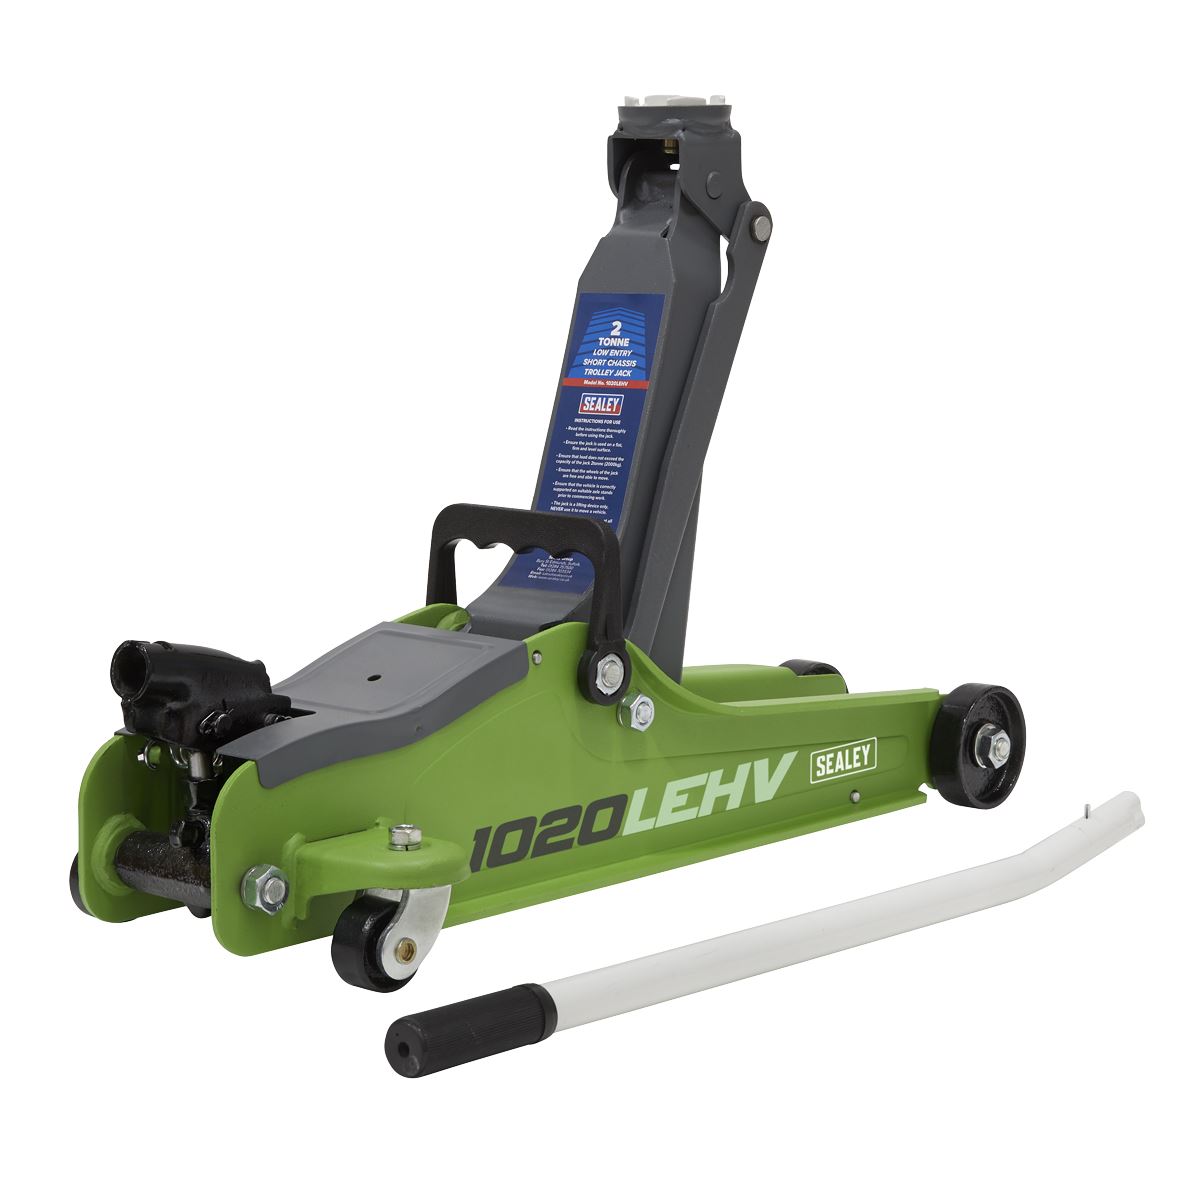 Sealey Trolley Jack 2tonne Low Entry Short Chassis - Hi-Vis Green